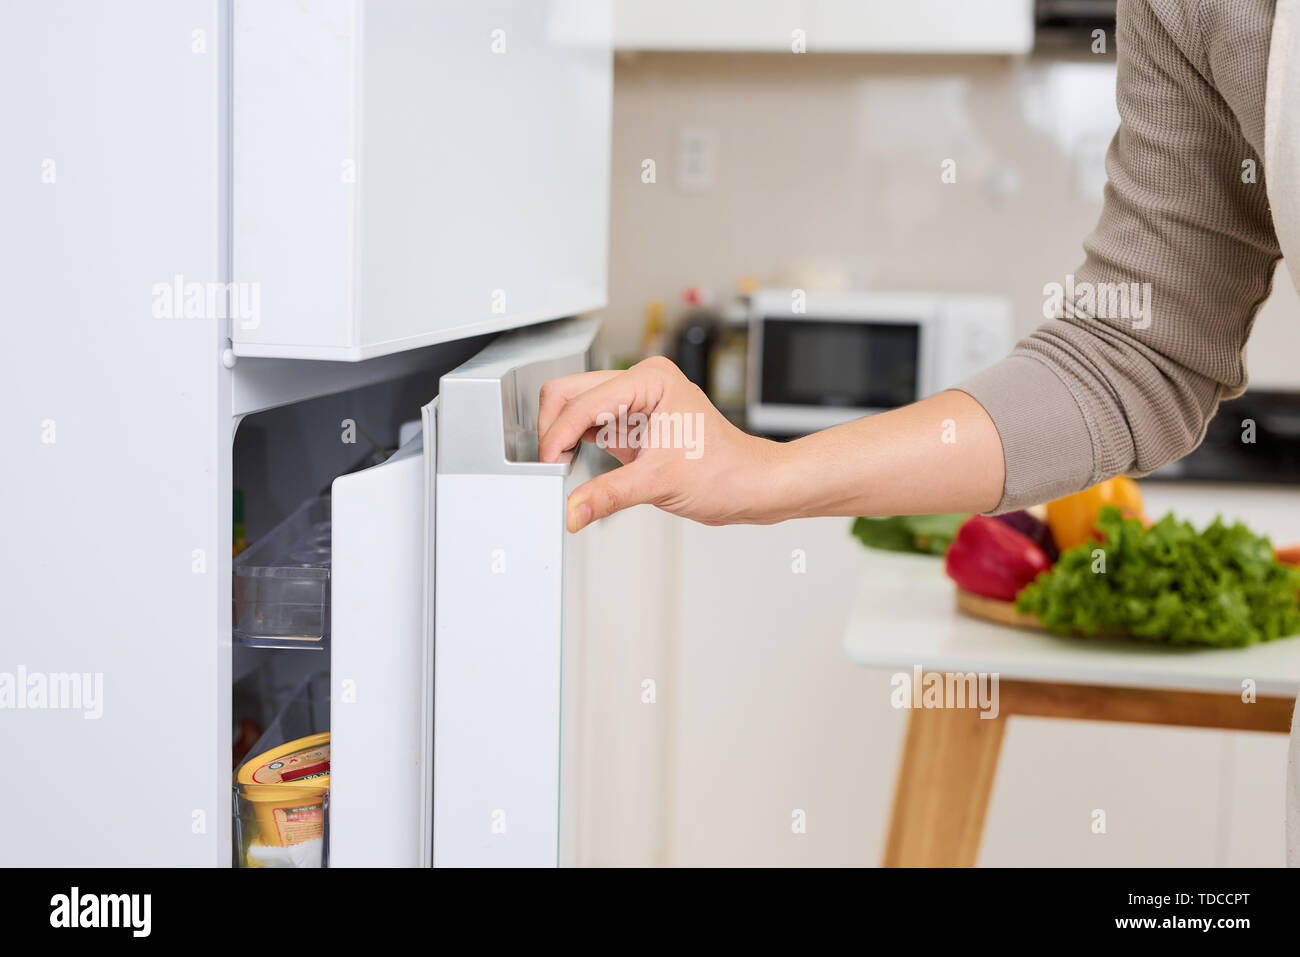 Abstract hand a young man is opening a refrigerator door Stock Photo